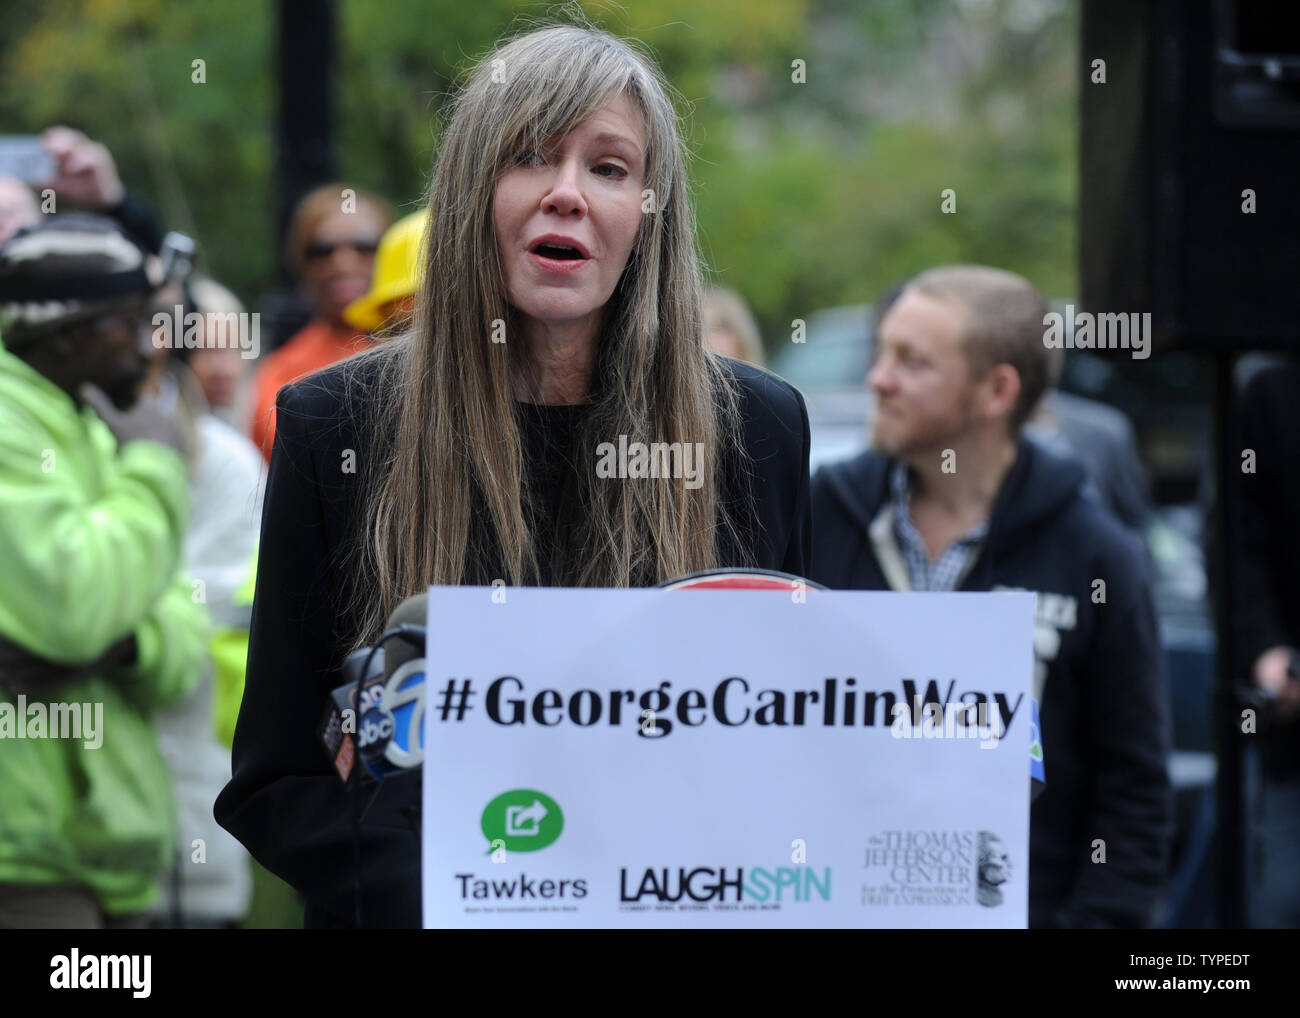 Sally Wade speaks at the George Carlin Way Unveiling Ceremony in New York City on October 22, 2014. During a special ceremony Wednesday afternoon, a sign went up on the block naming it 'George Carlin Way'.  The late comedian grew up on West 121st Street between Broadway and Amsterdam in Morningside Heights.       UPI/Dennis Van Tine Stock Photo